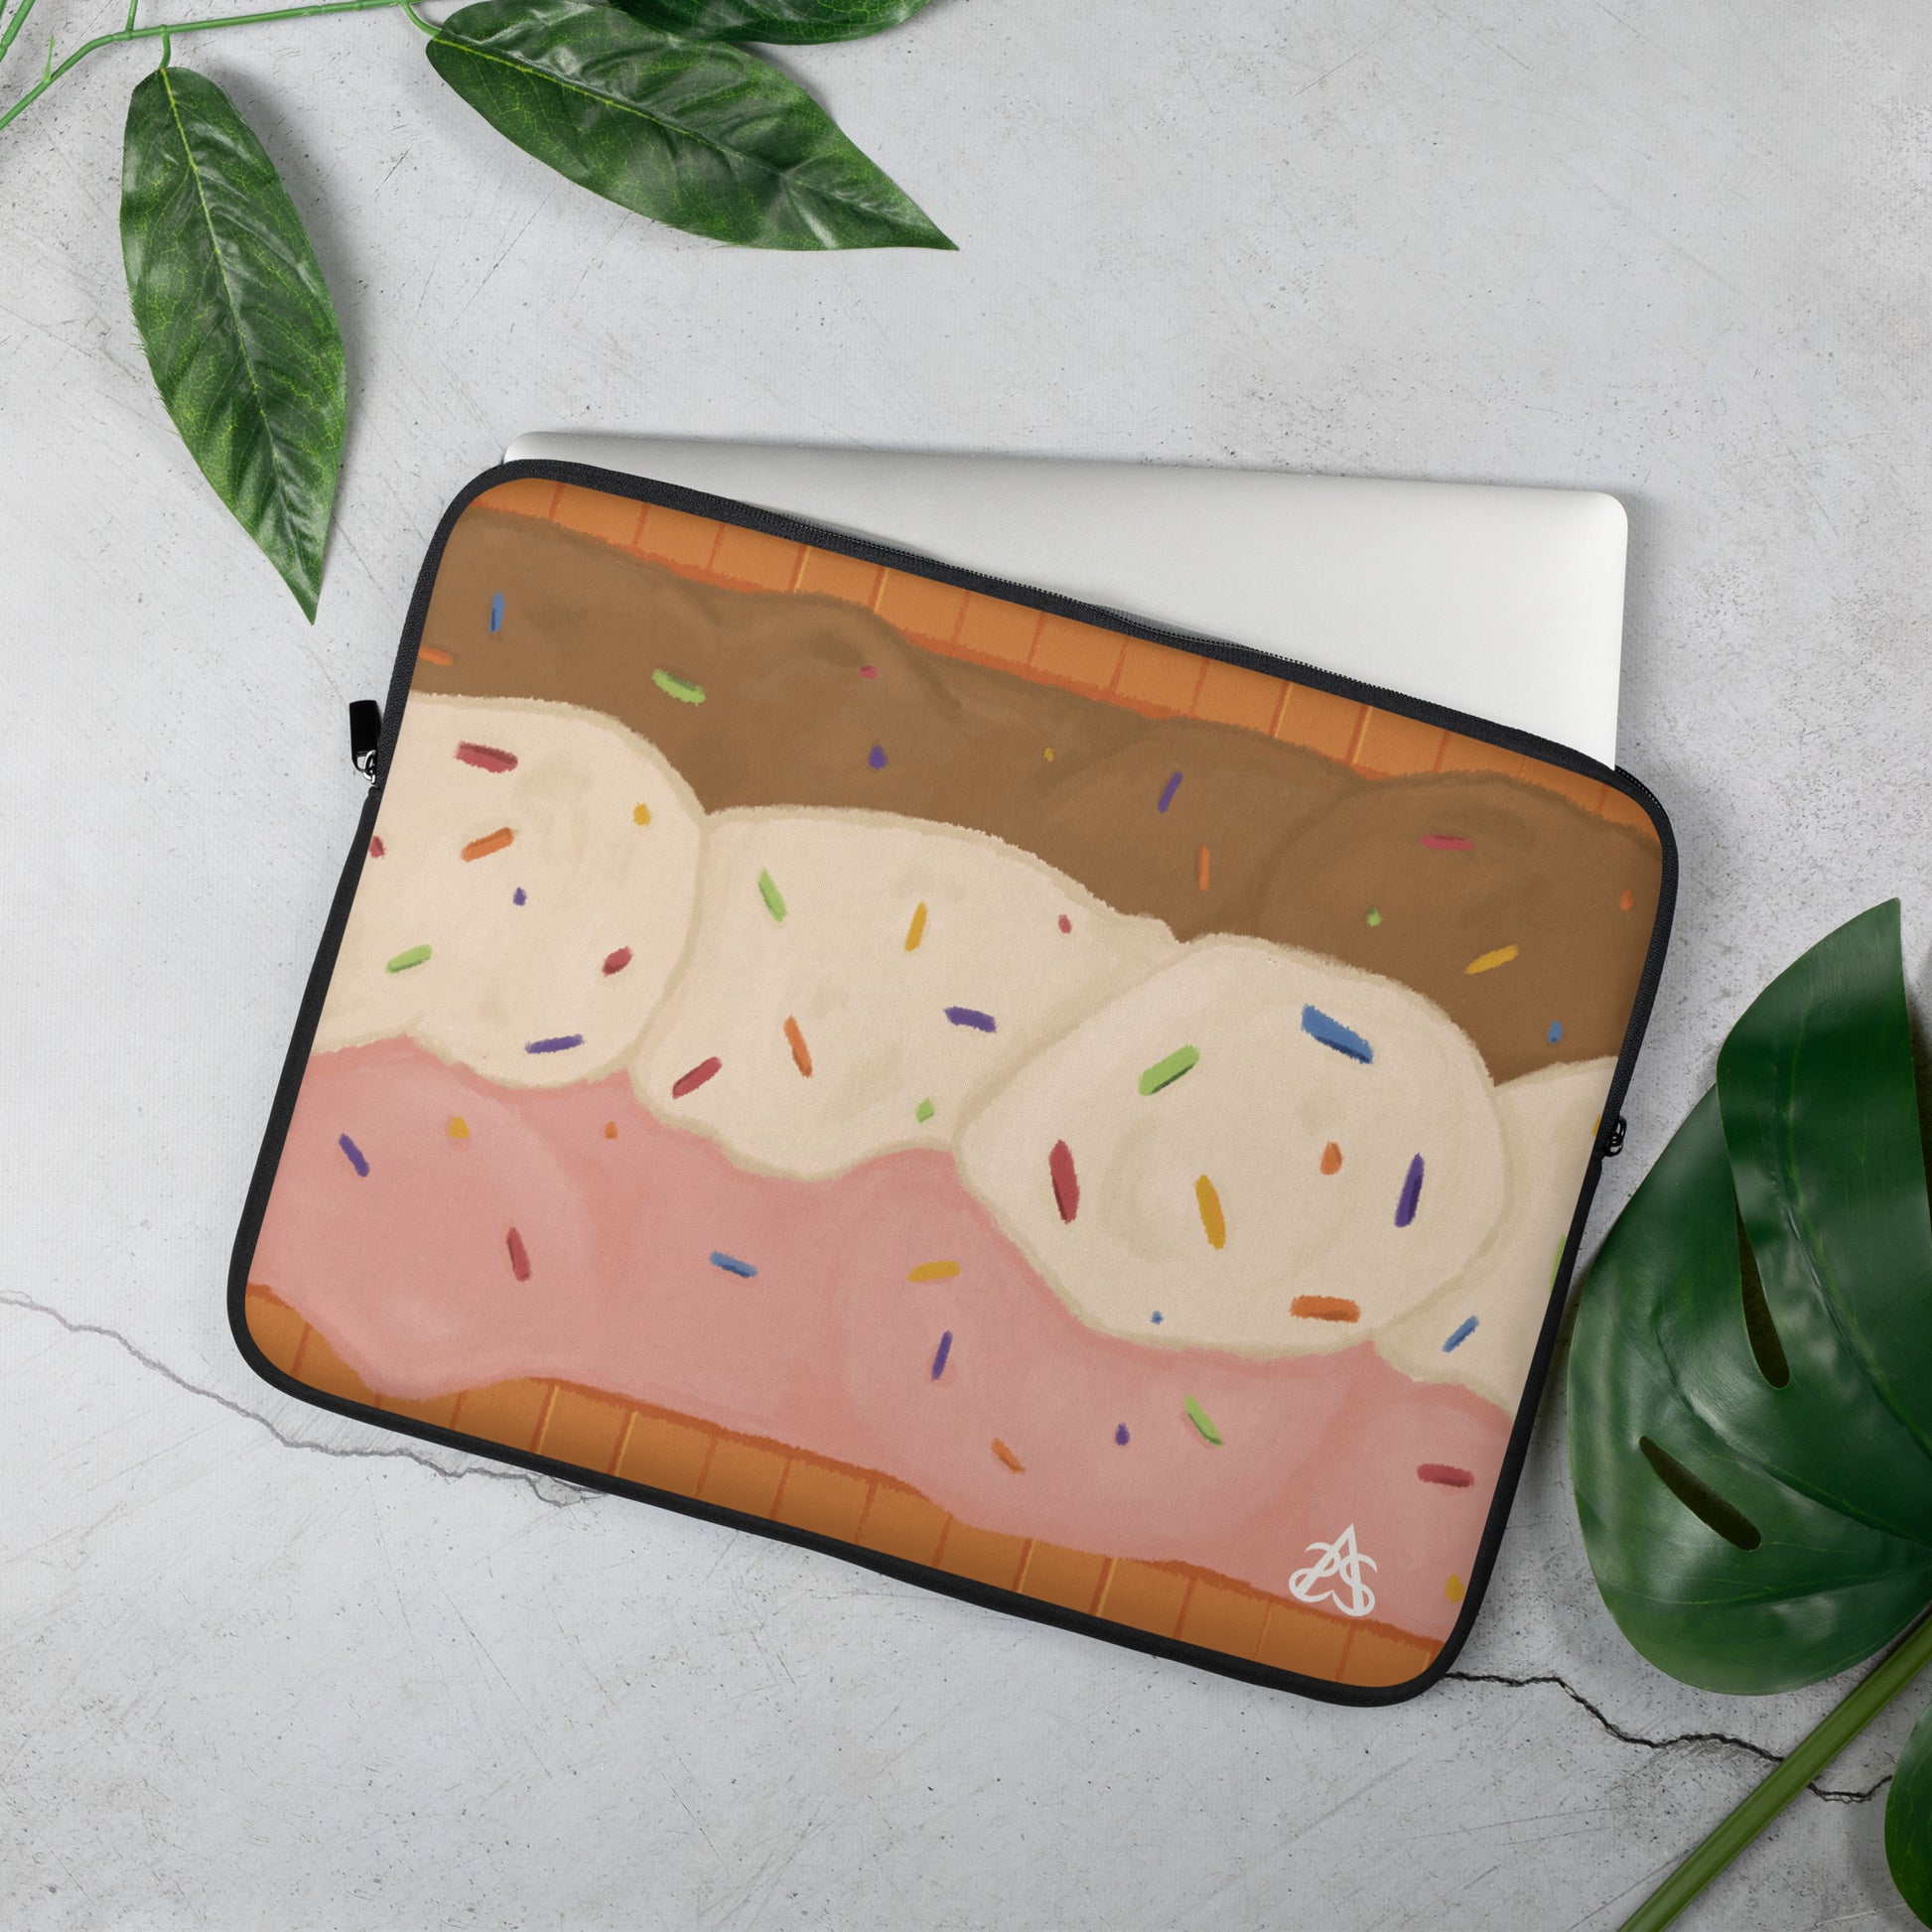 A laptop sleeve with a design of a Neapolitan ice cream sundae in a waffle cone with rainbow sprinkles.